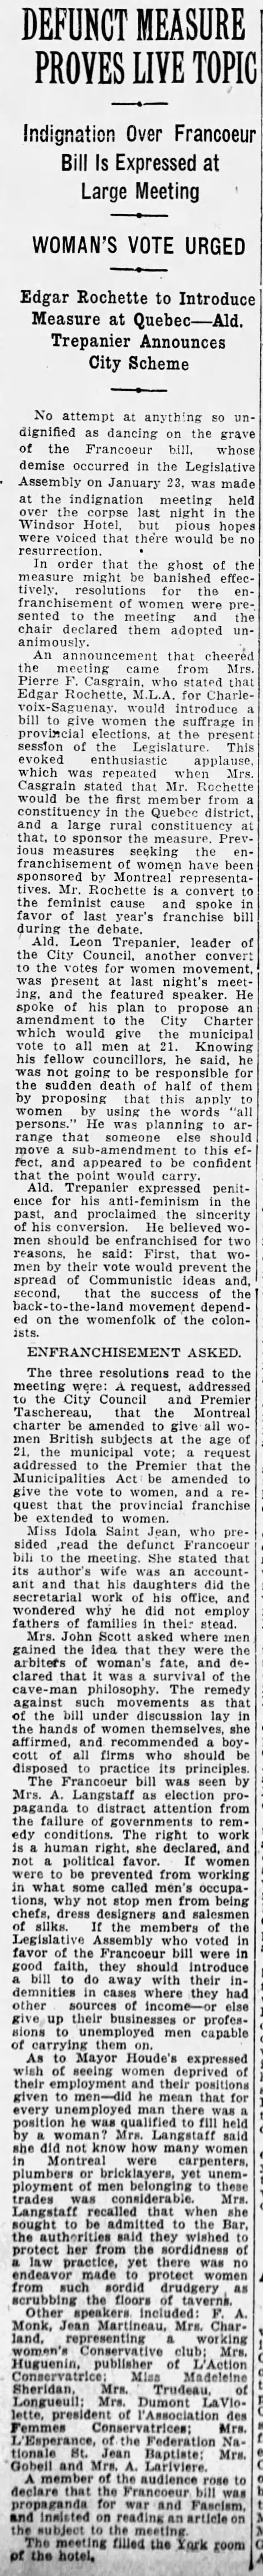 Defunct Measure Proves Live Topic. The Gazette (Montreal, Quebec, Canada) 10 February 1935, p 9